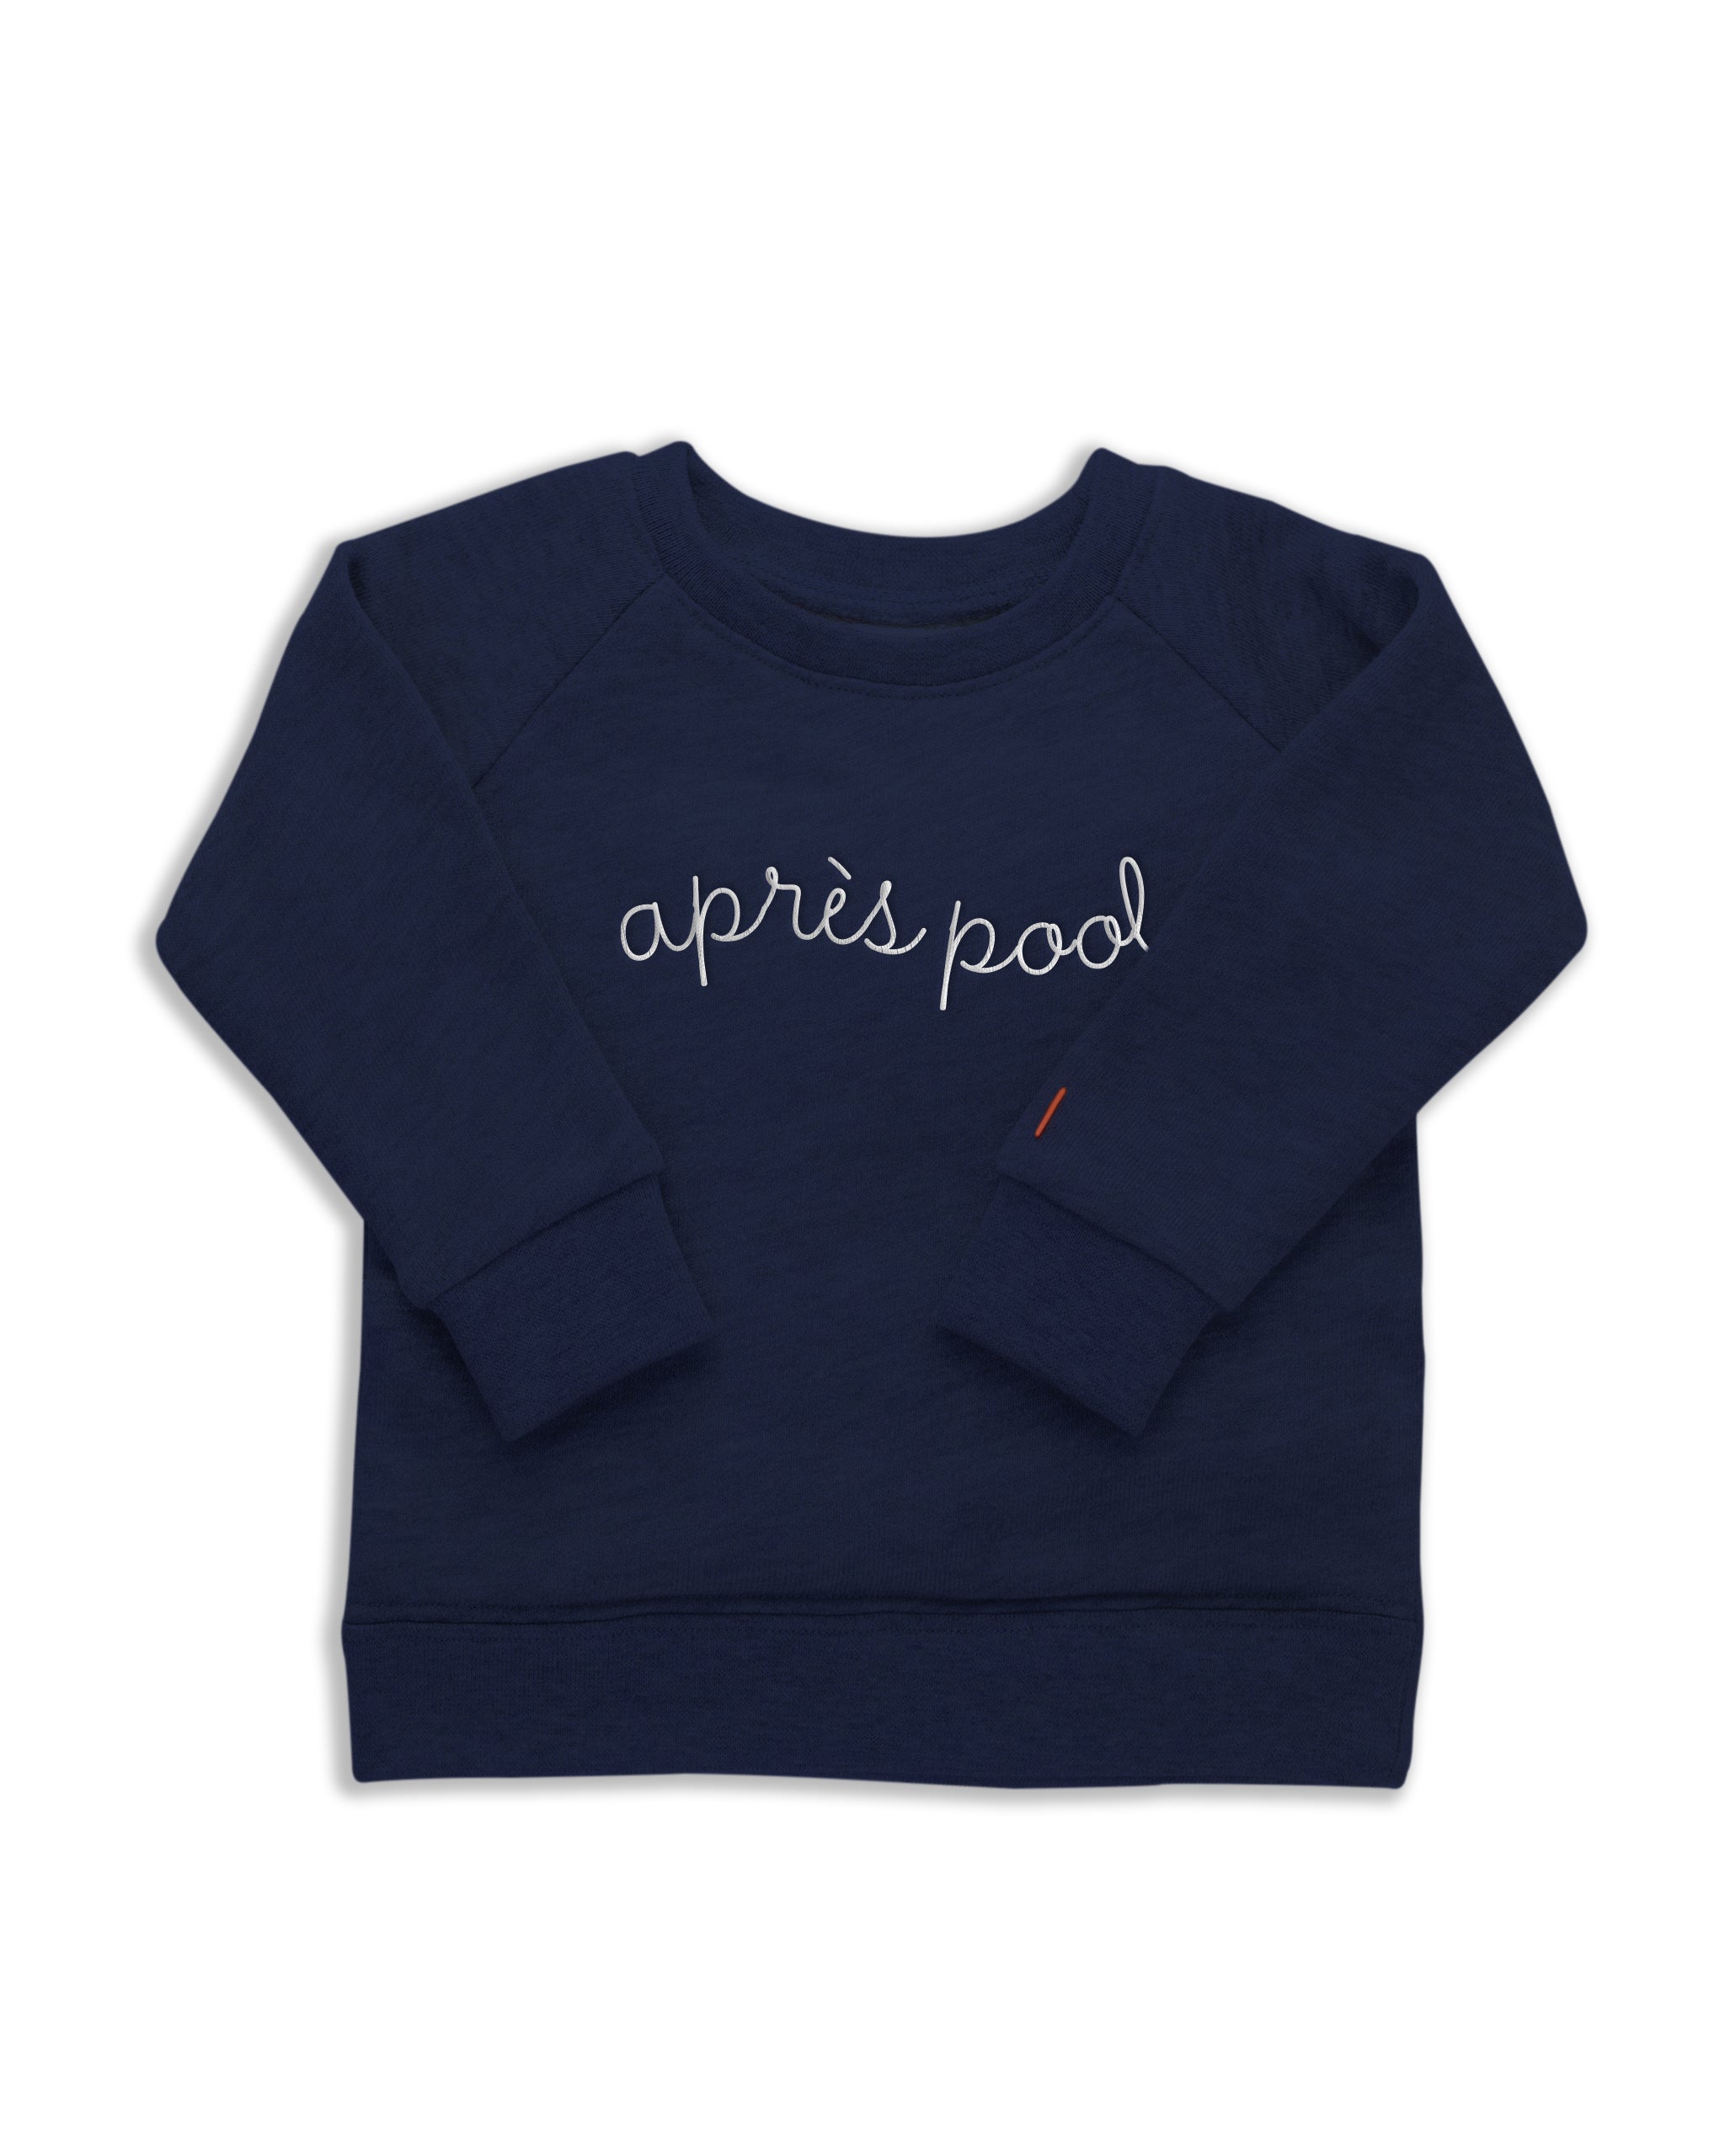 The Organic Embroidered Pullover Sweatshirt [Navy Apres Pool]